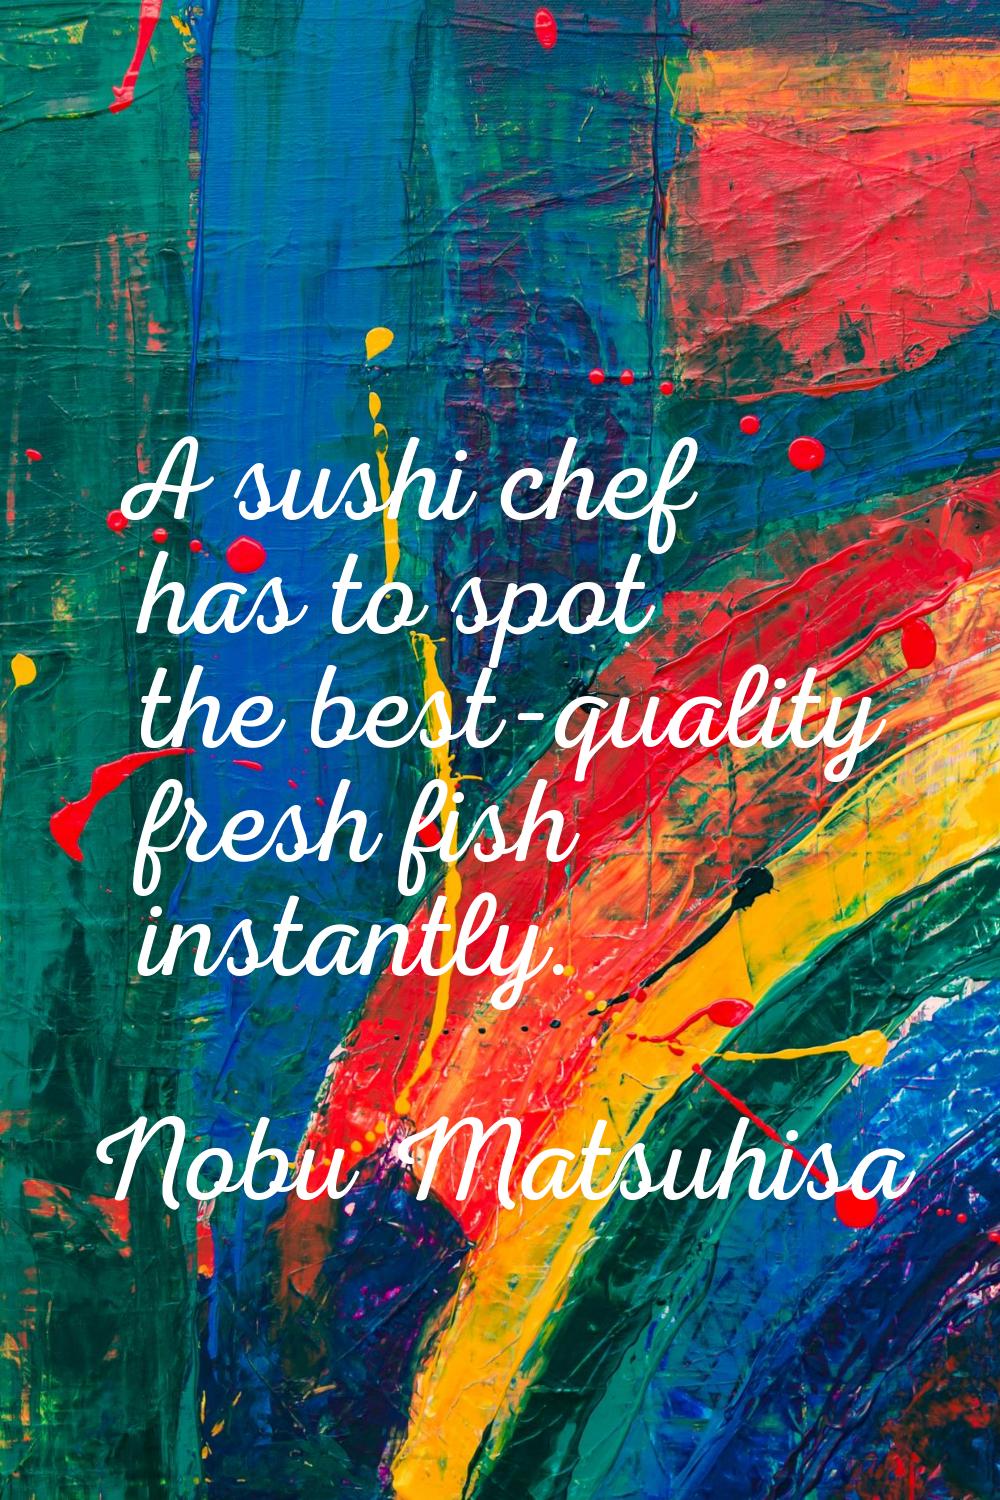 A sushi chef has to spot the best-quality fresh fish instantly.